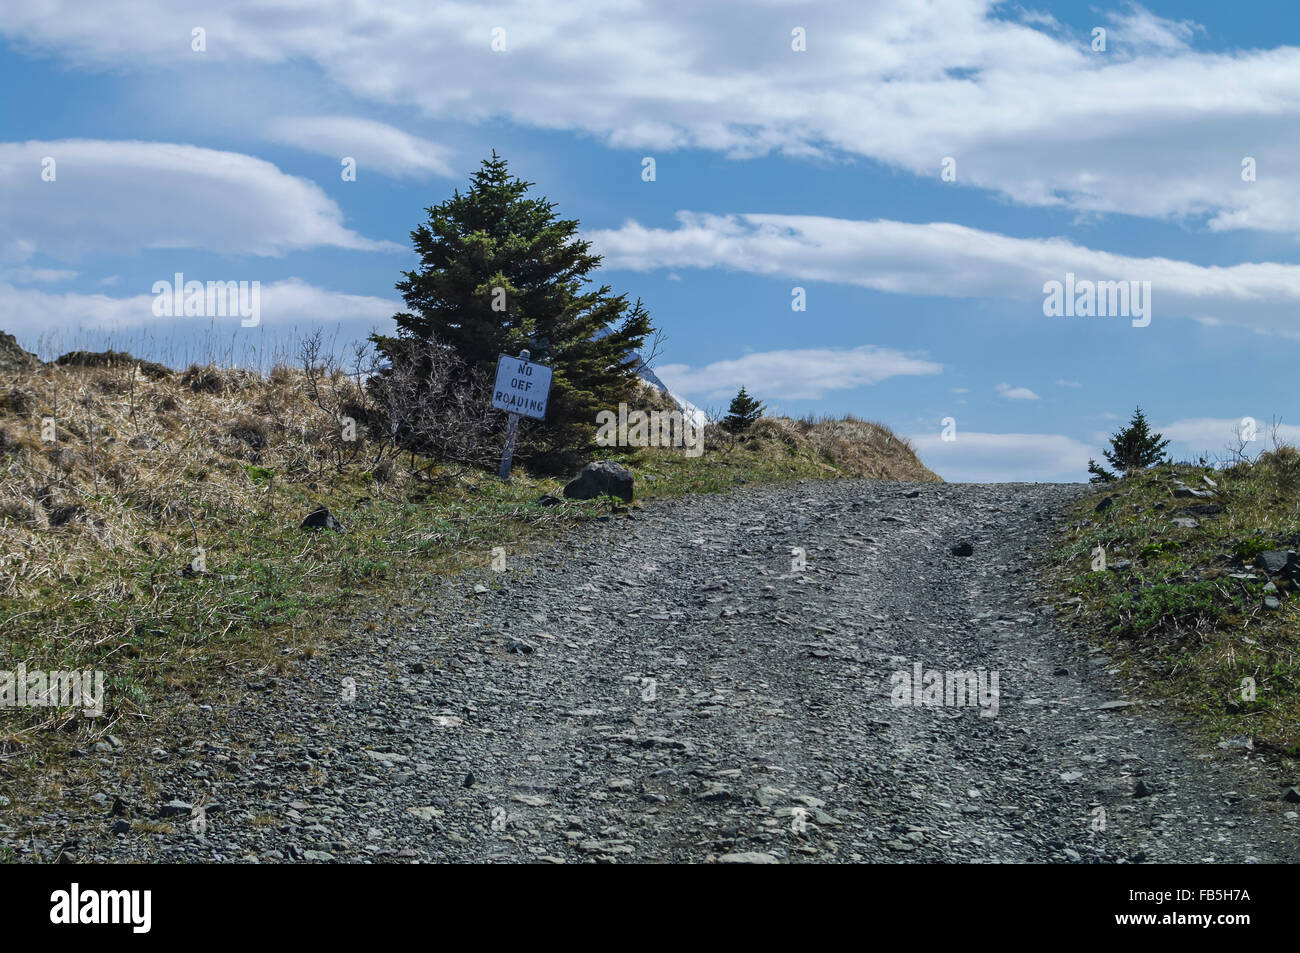 Sign reading 'No off-roading' on side of a gravel road. Stock Photo